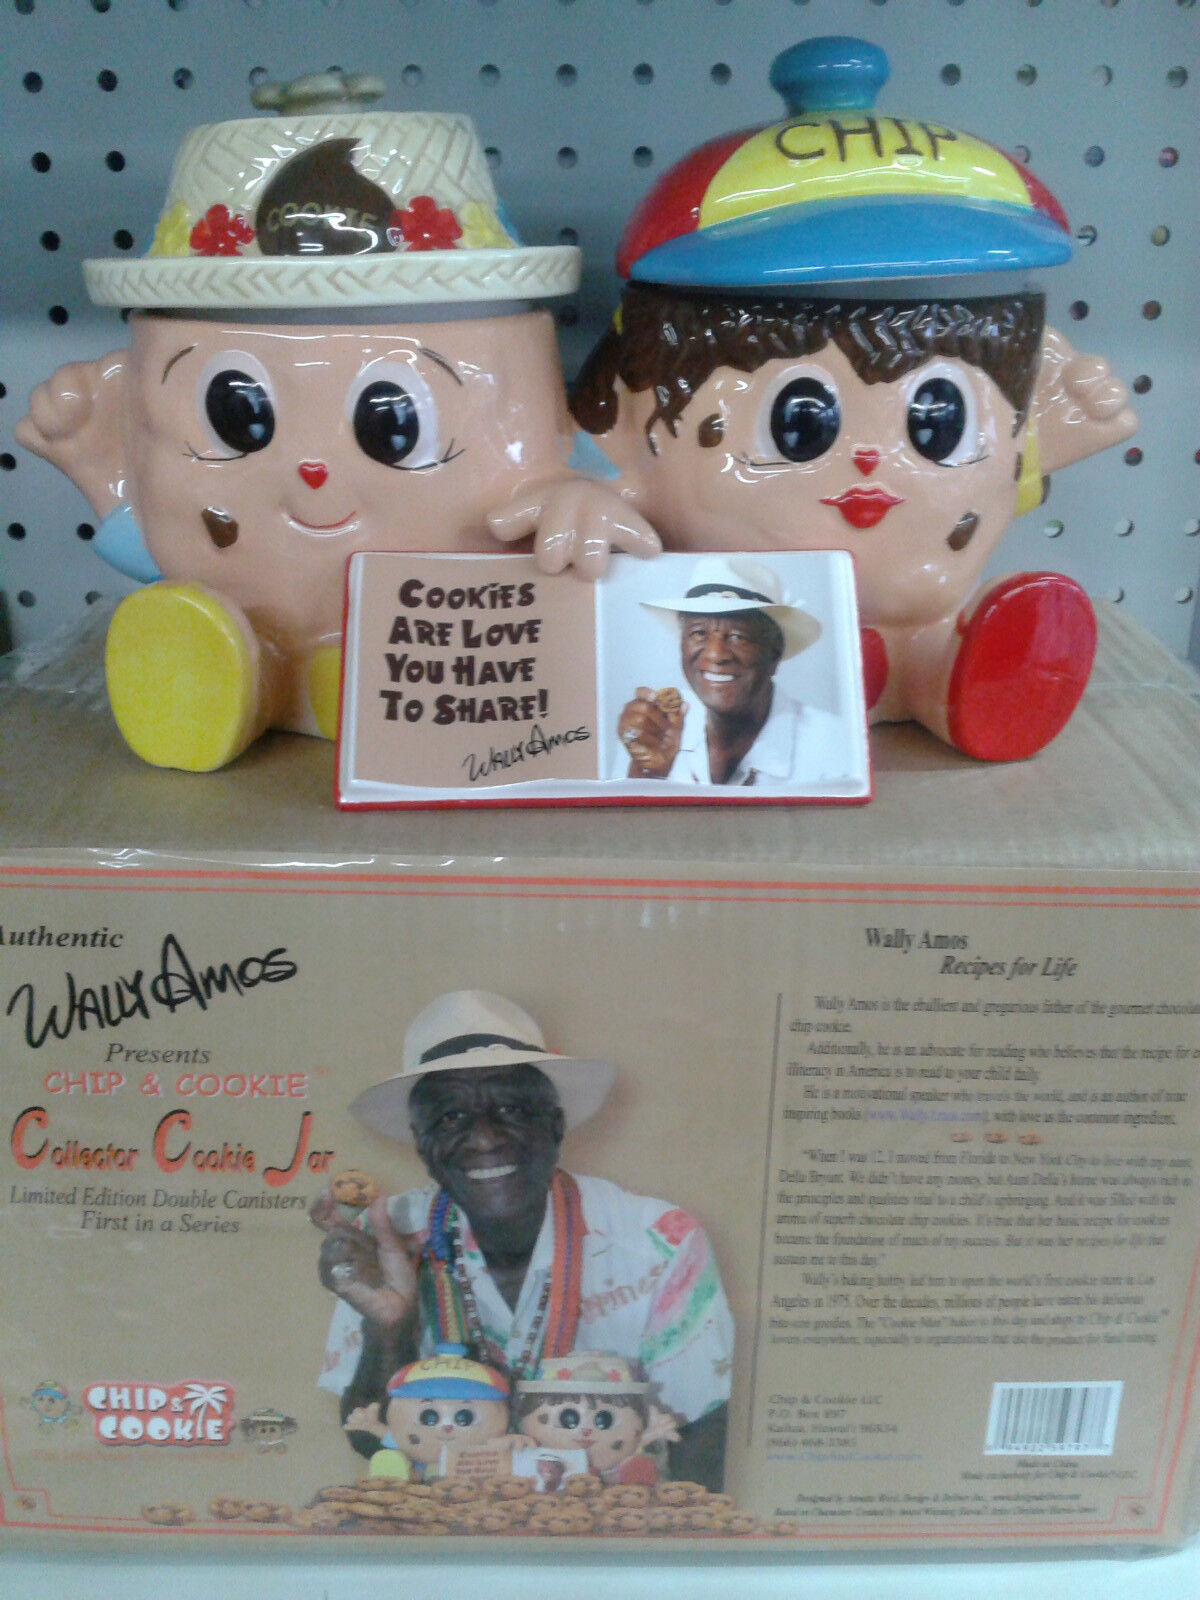 Famous Wally Amos Double Canister  Character Cookie Jar  Limited Edition NIB